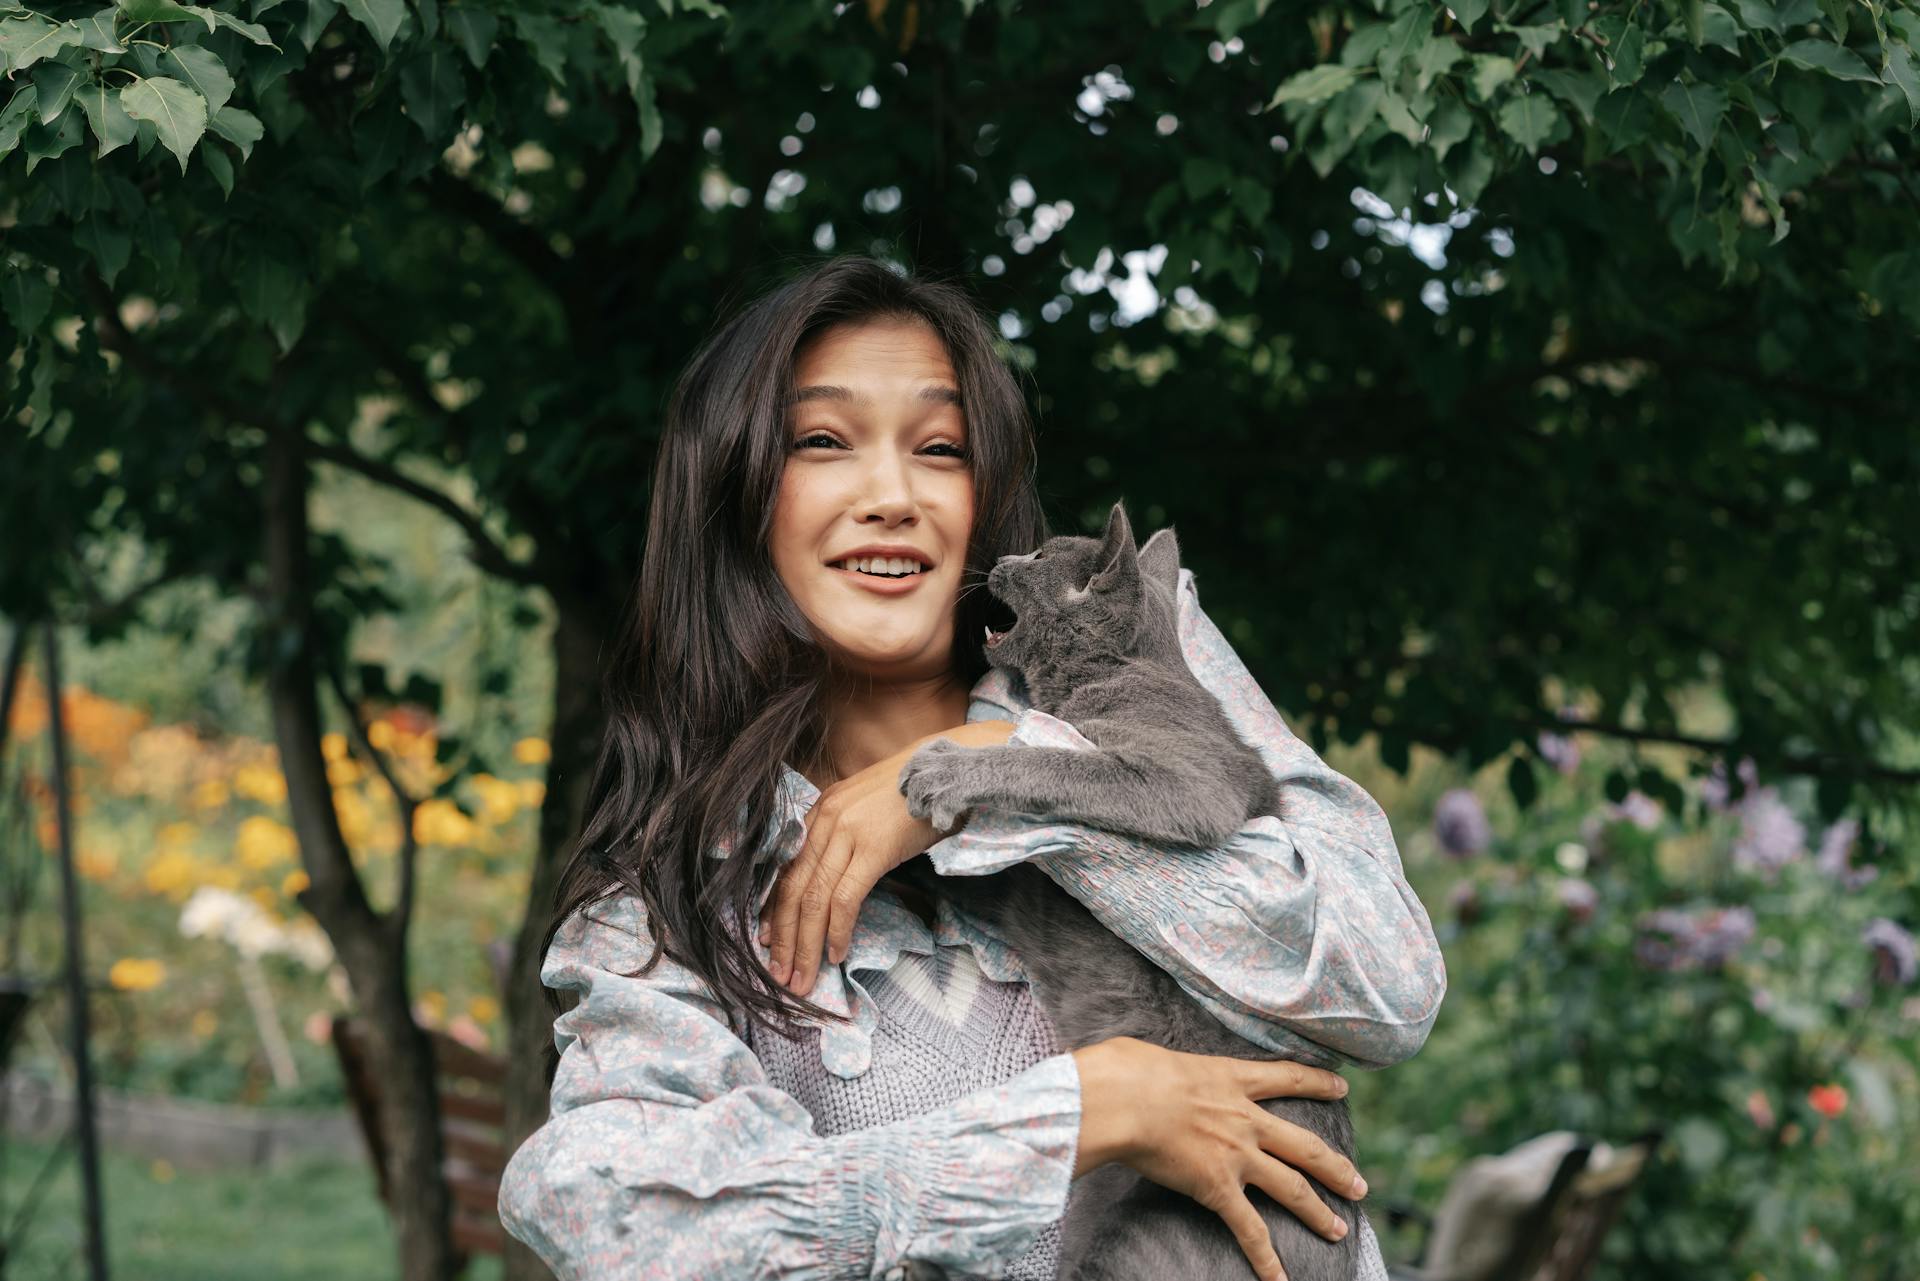 A woman holding a cat in her arms outdoors